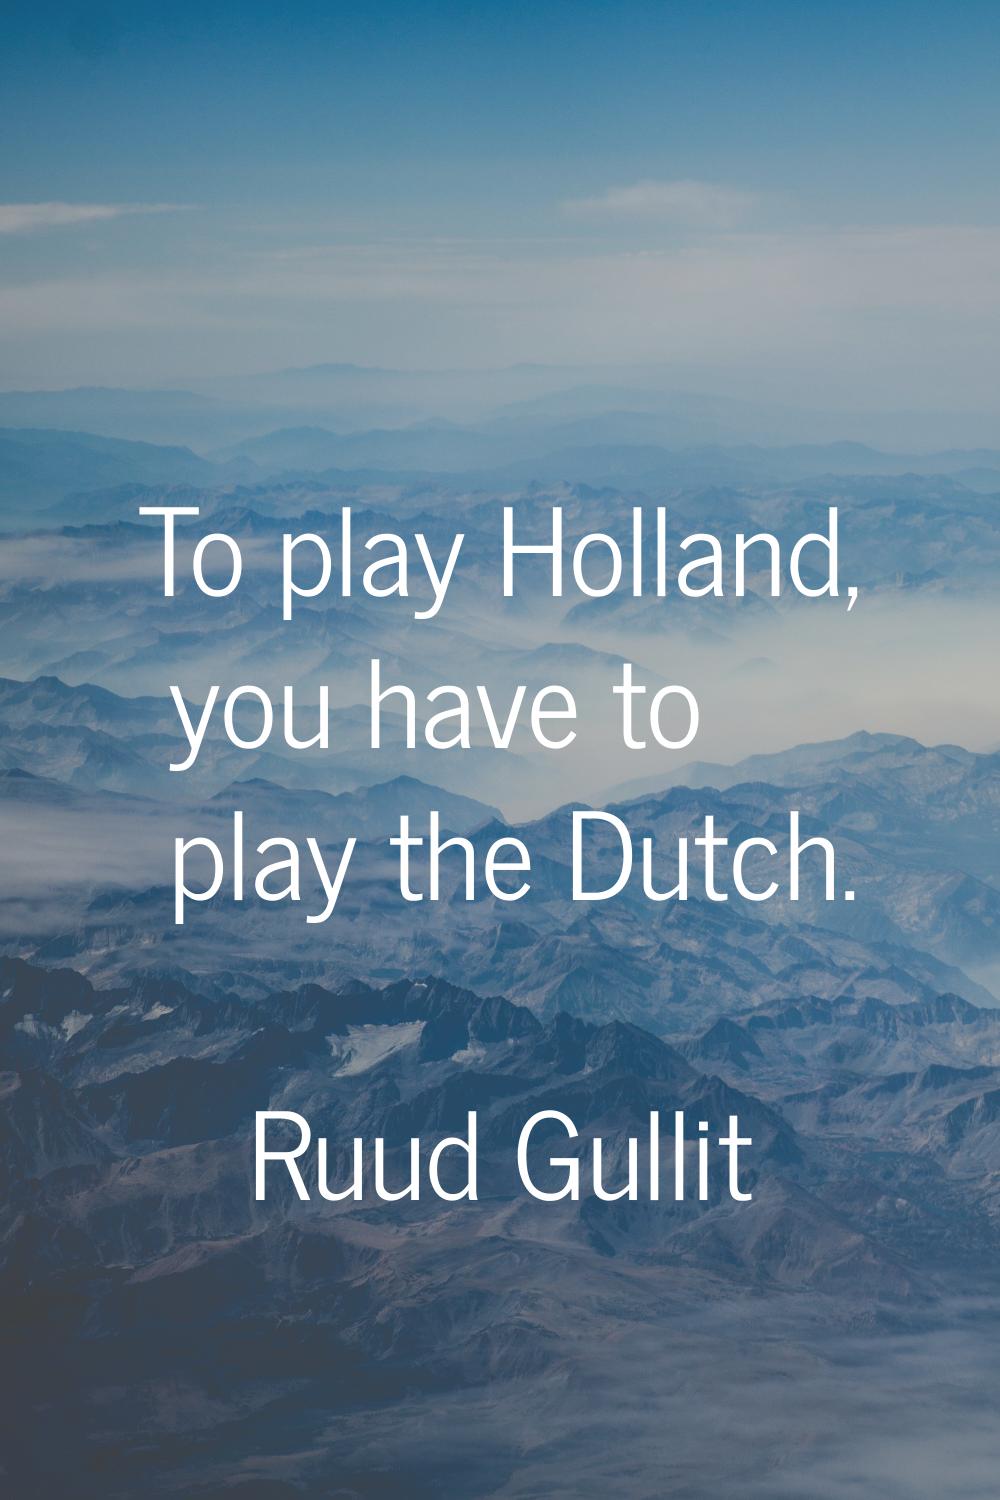 To play Holland, you have to play the Dutch.